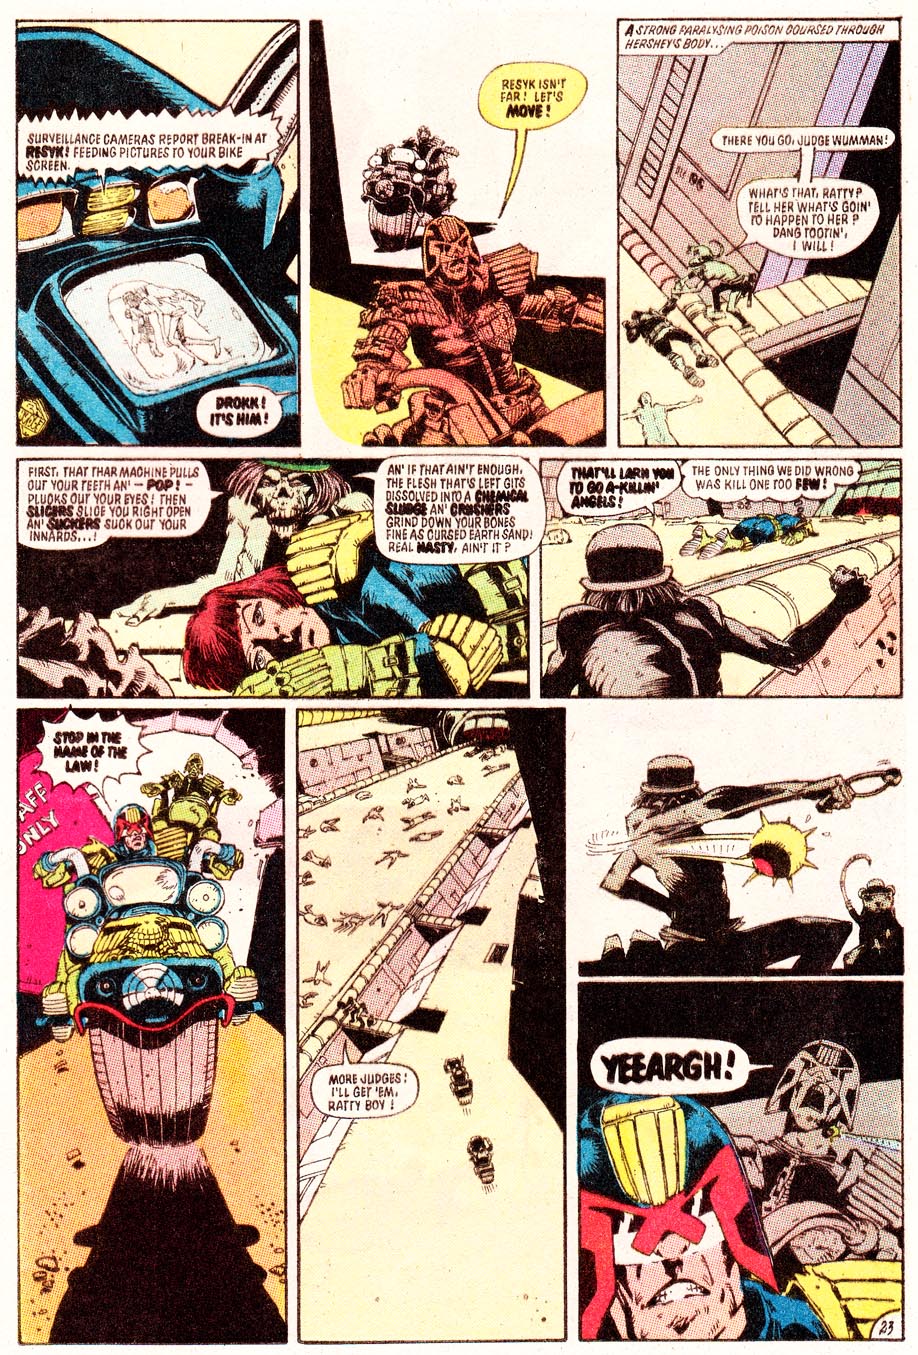 Read online Judge Dredd: The Complete Case Files comic -  Issue # TPB 4 - 250